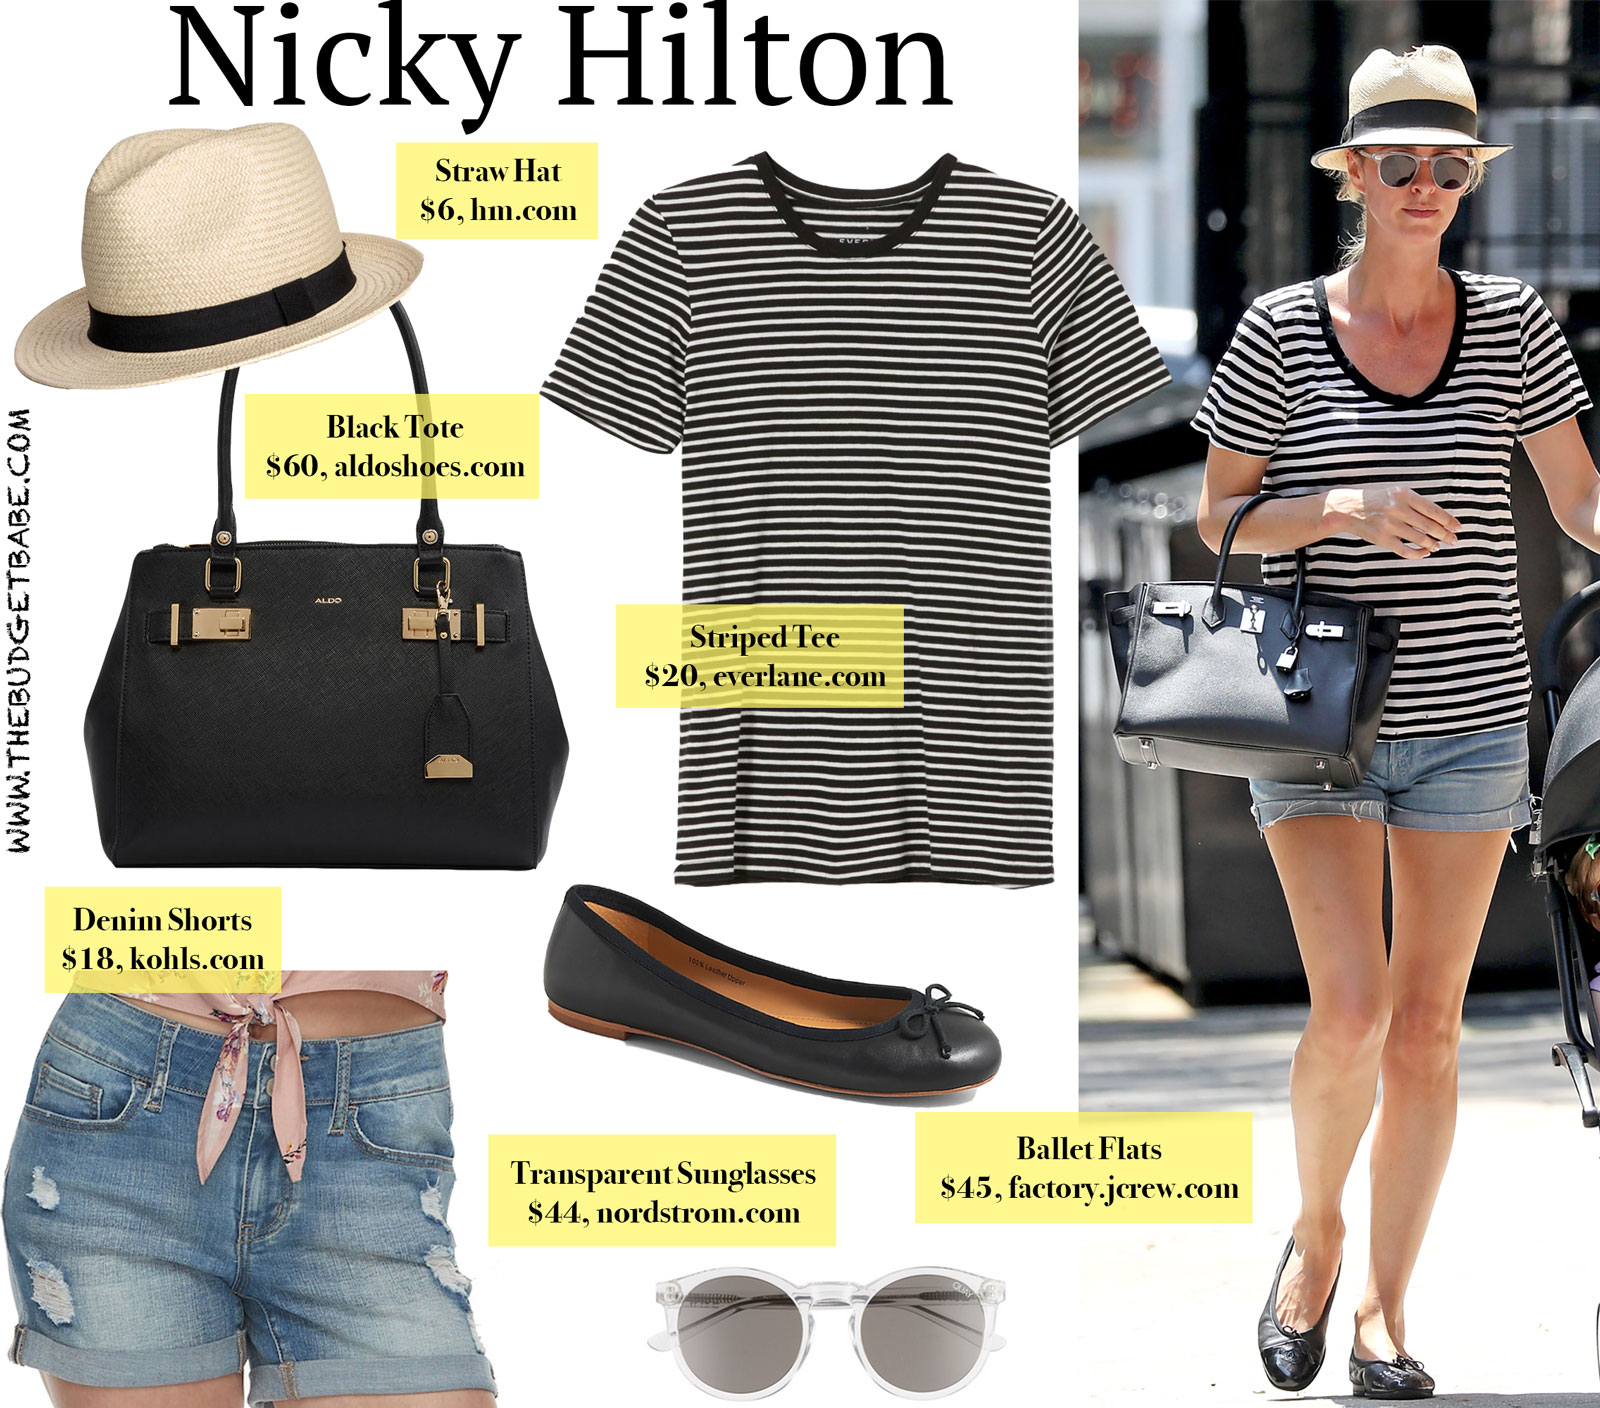 Nicky Hilton Striped Tee and Black Tote Look for Less